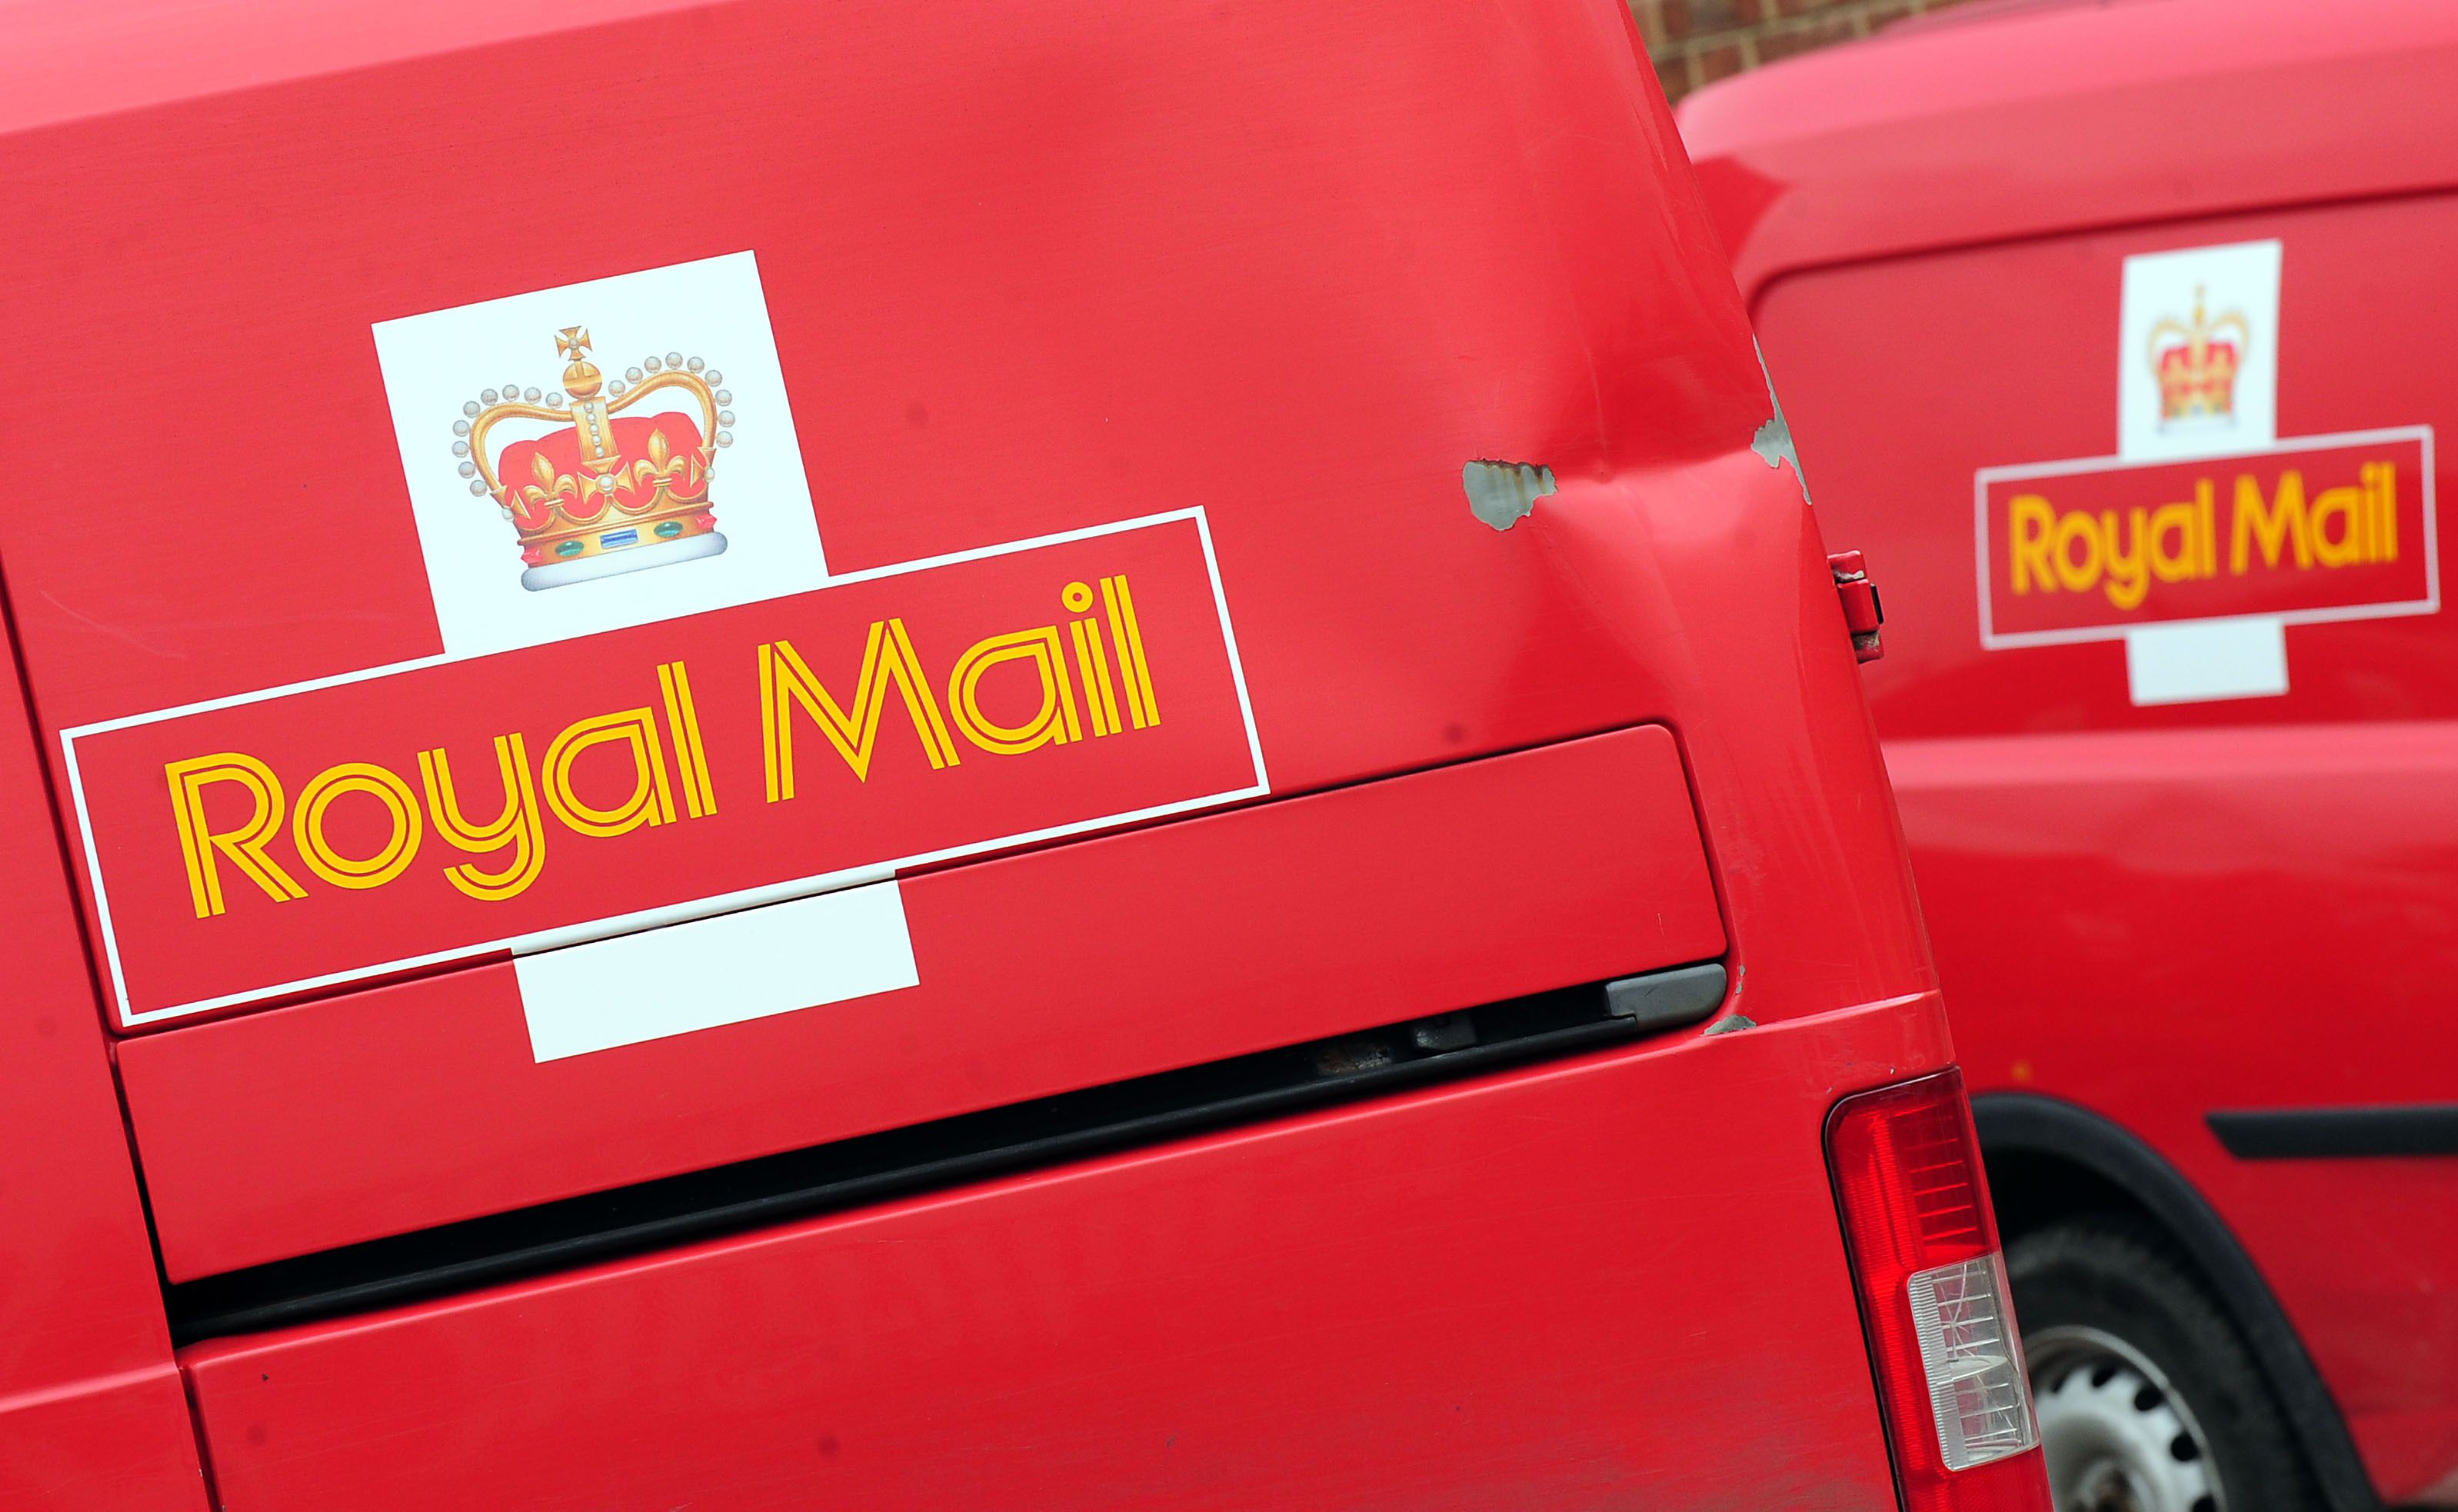 Royal Mail workers are on strike